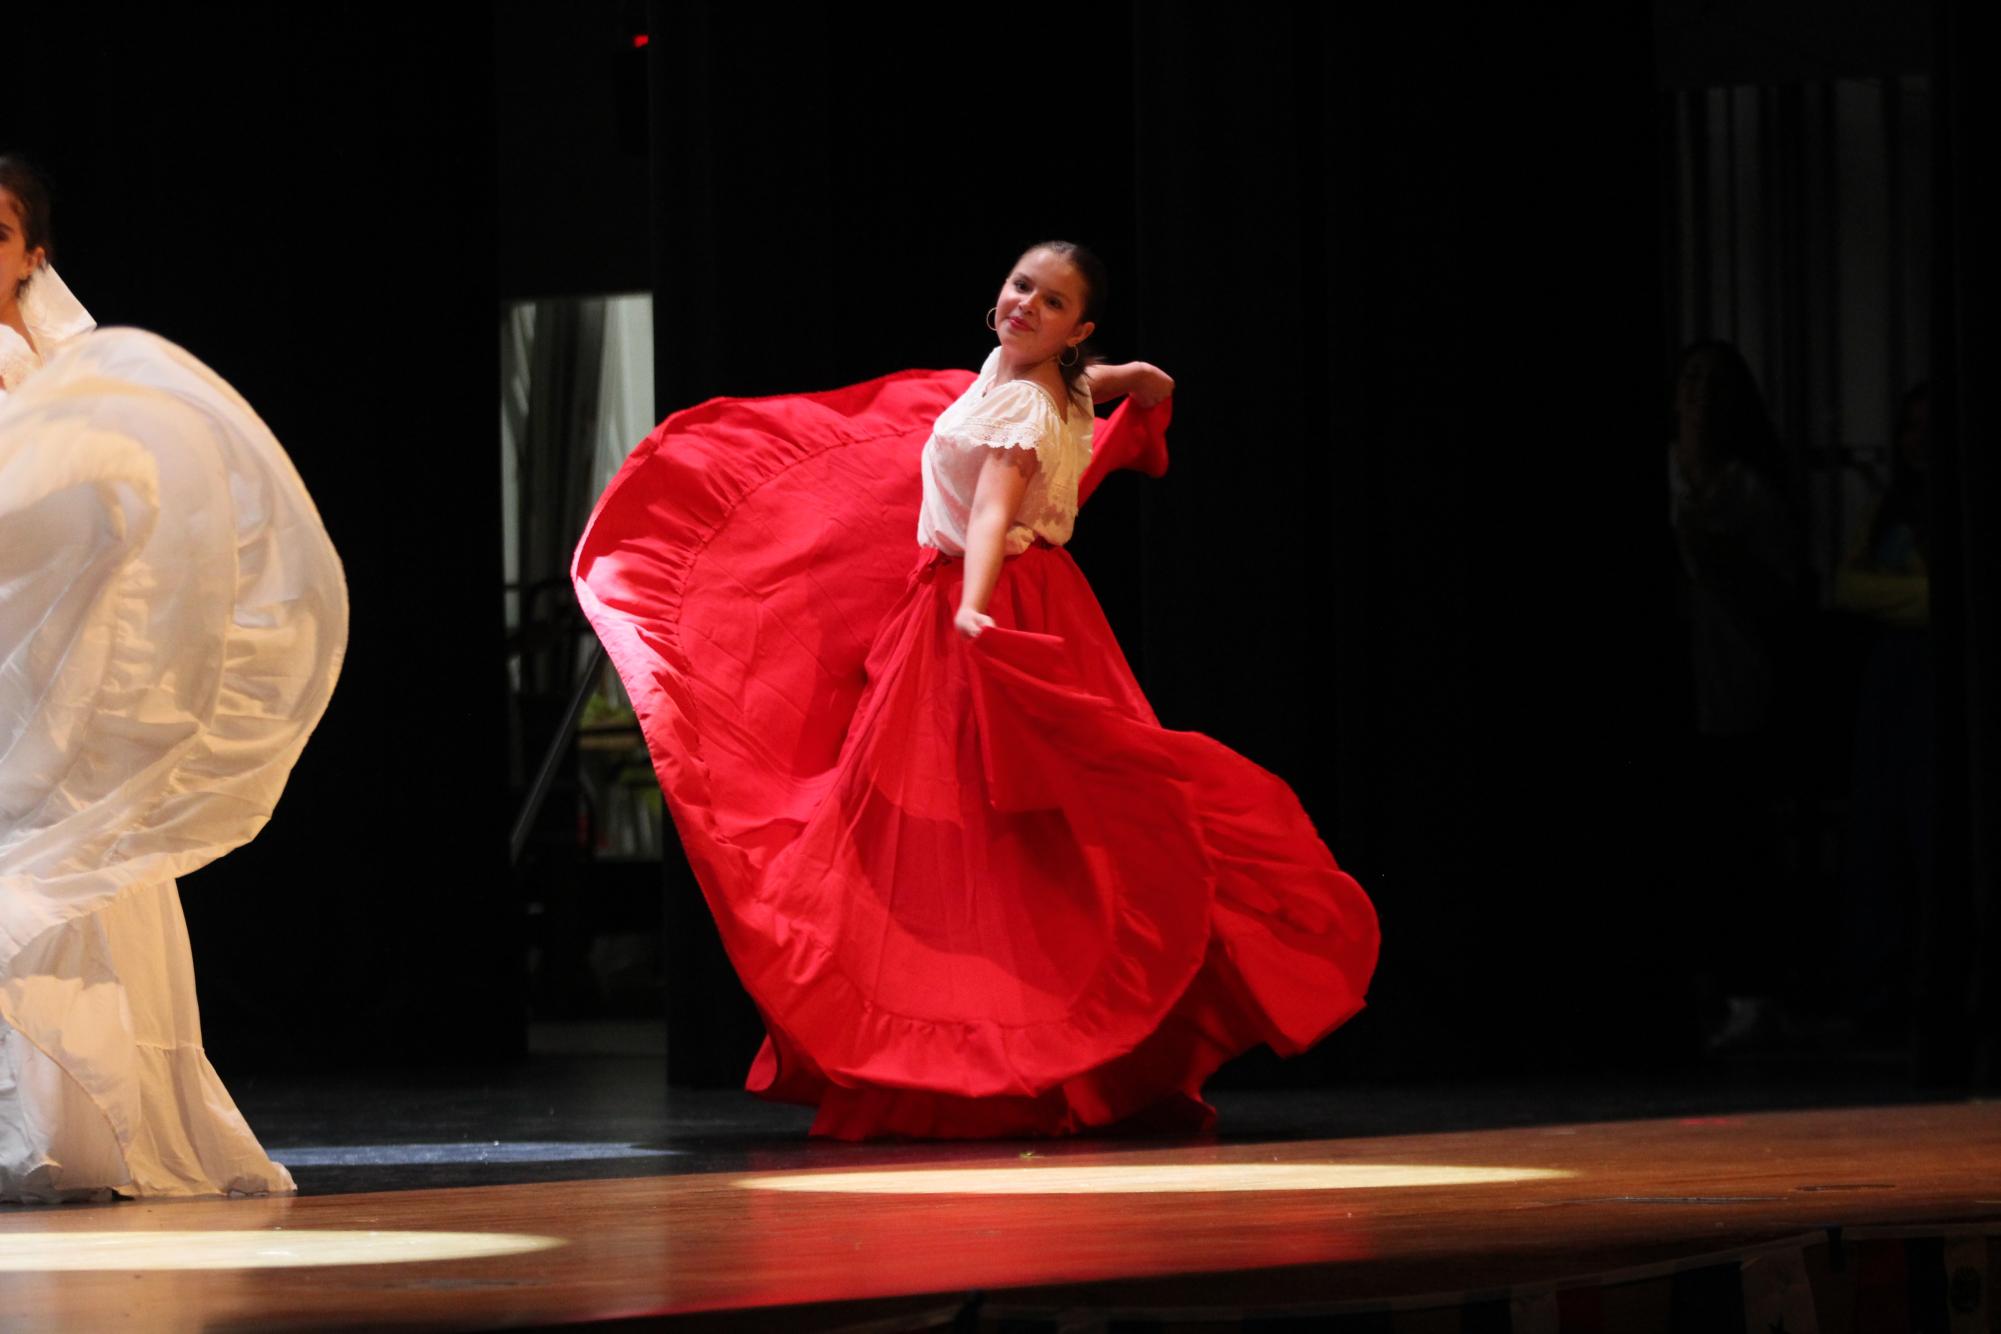 Starting Off. Twirling in her dress, sophomore Valeria Gutierrez dances on stage during zapateado tradicional. This dance originates from Mexico which consists of a flamenco dance with rhythmic stamping of the feet. 